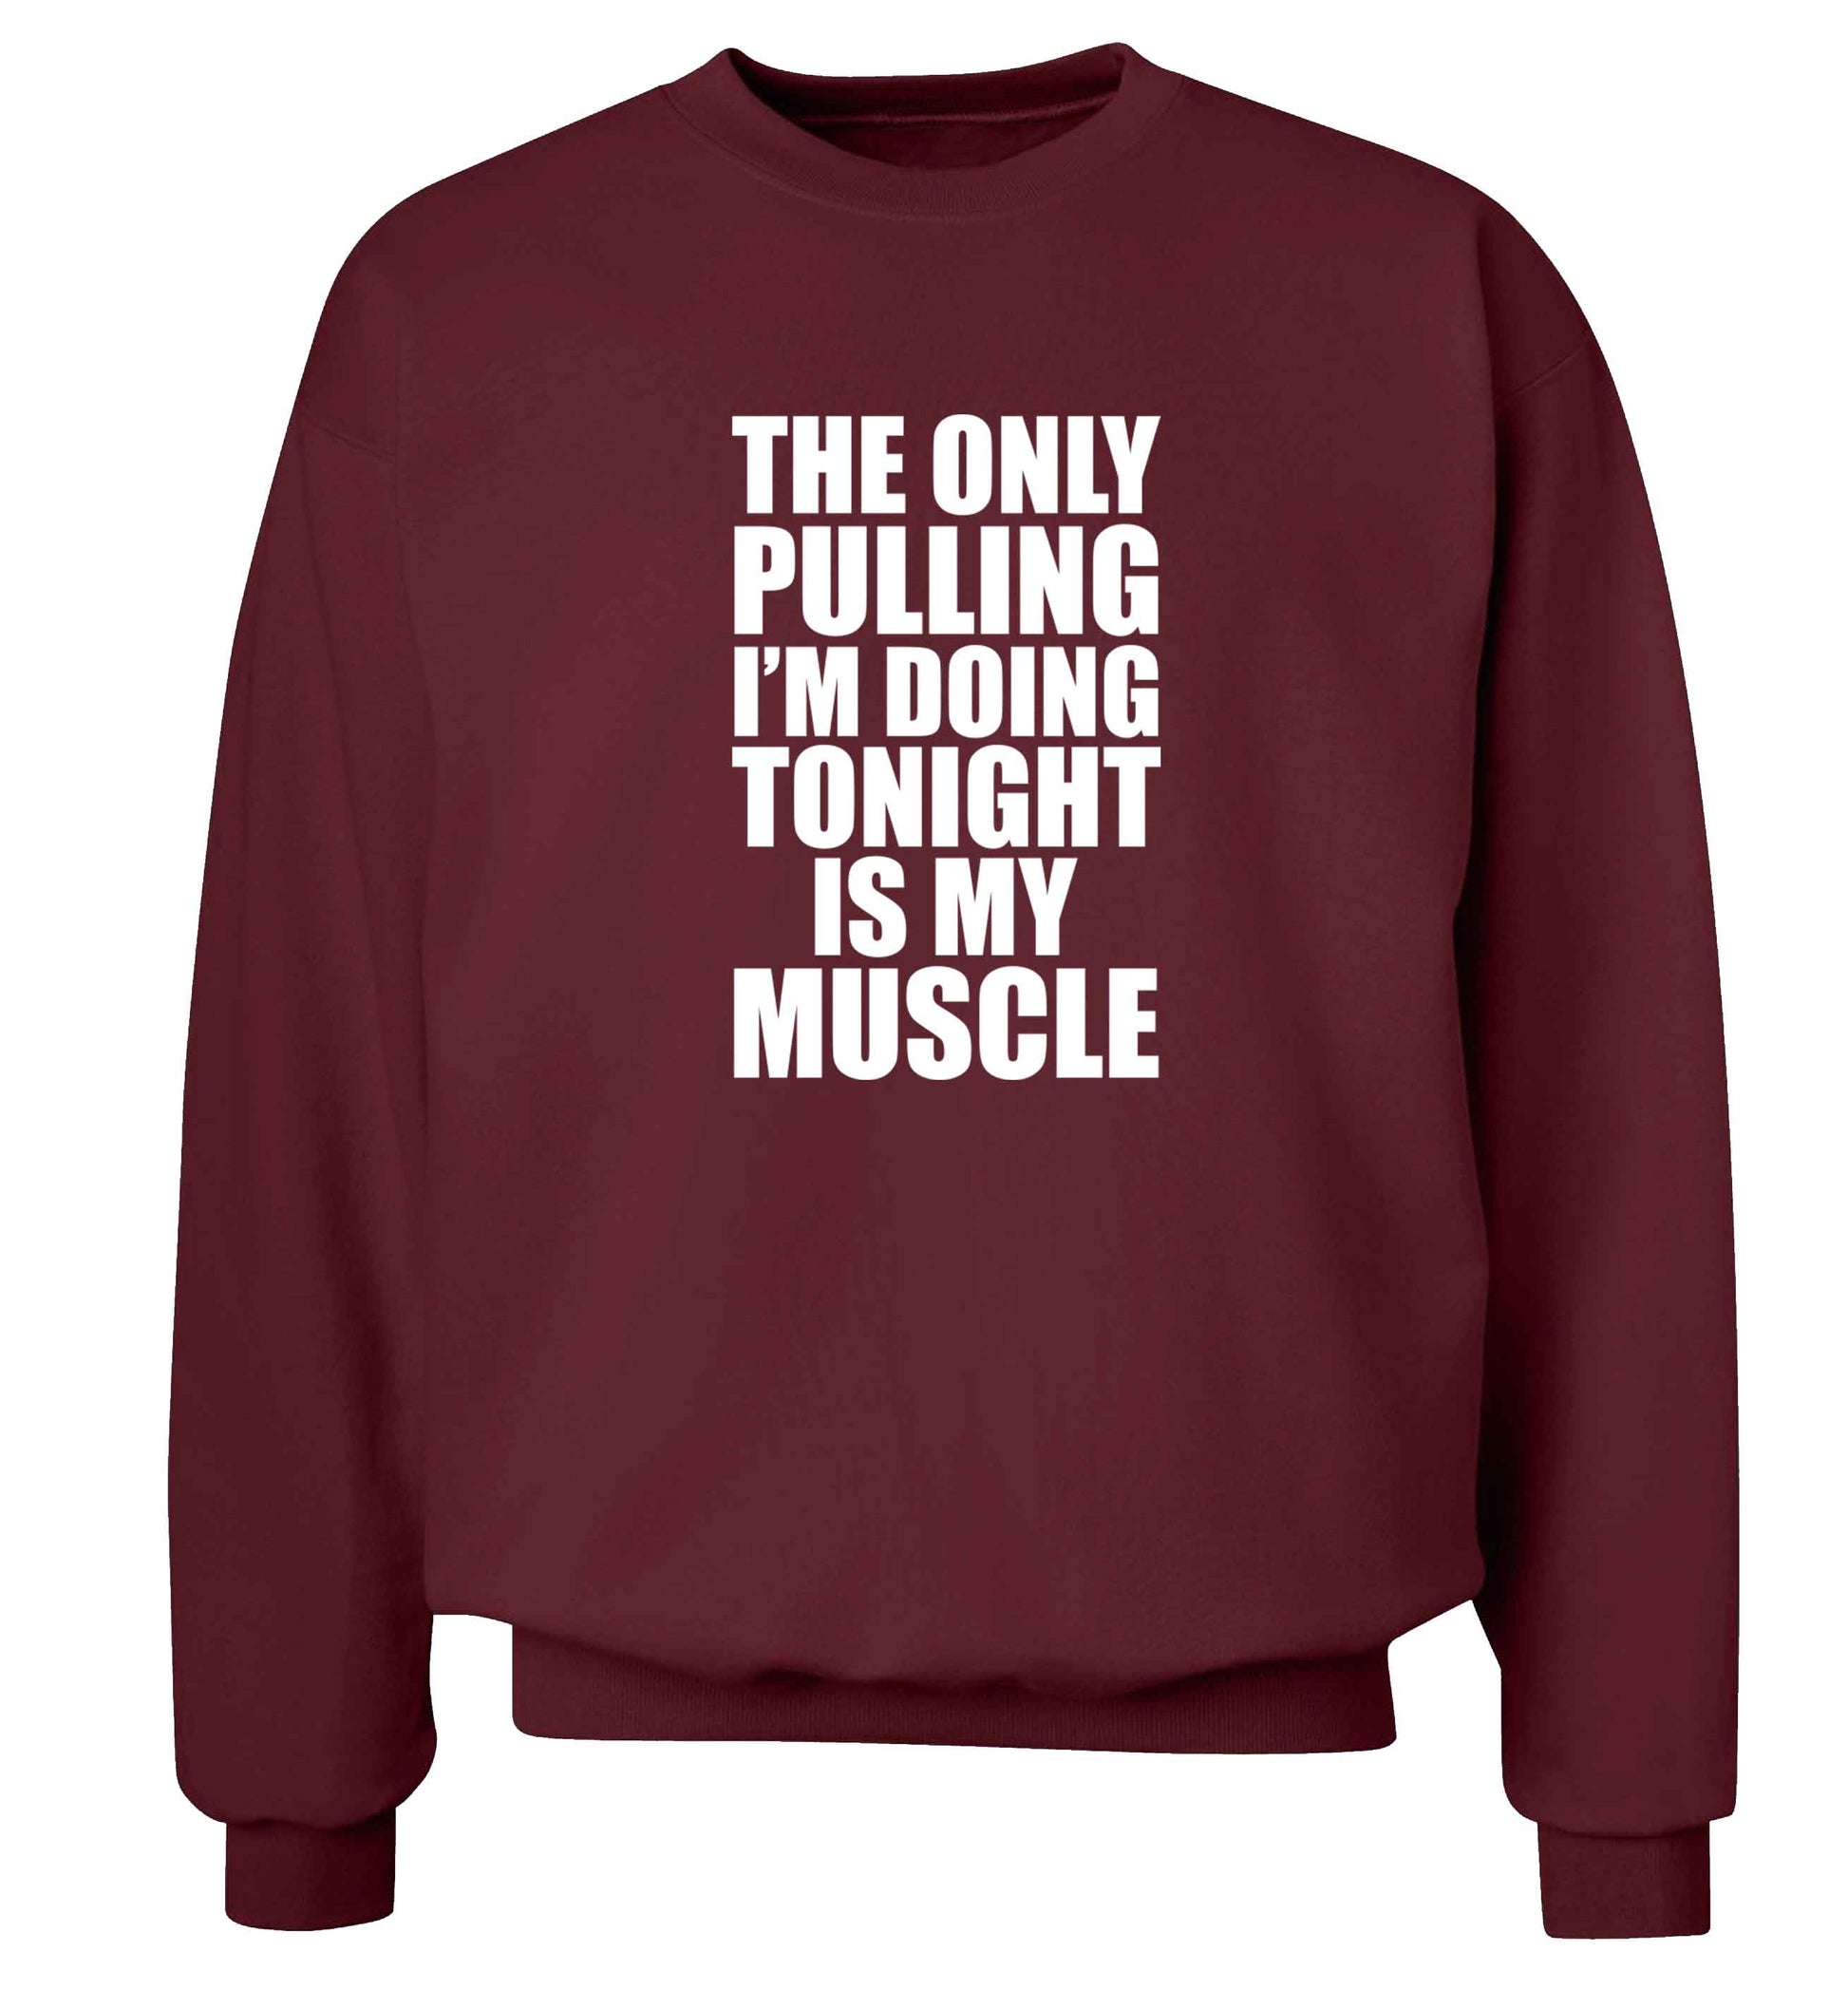 The only pulling I'm doing tonight is my muscle adult's unisex maroon sweater 2XL